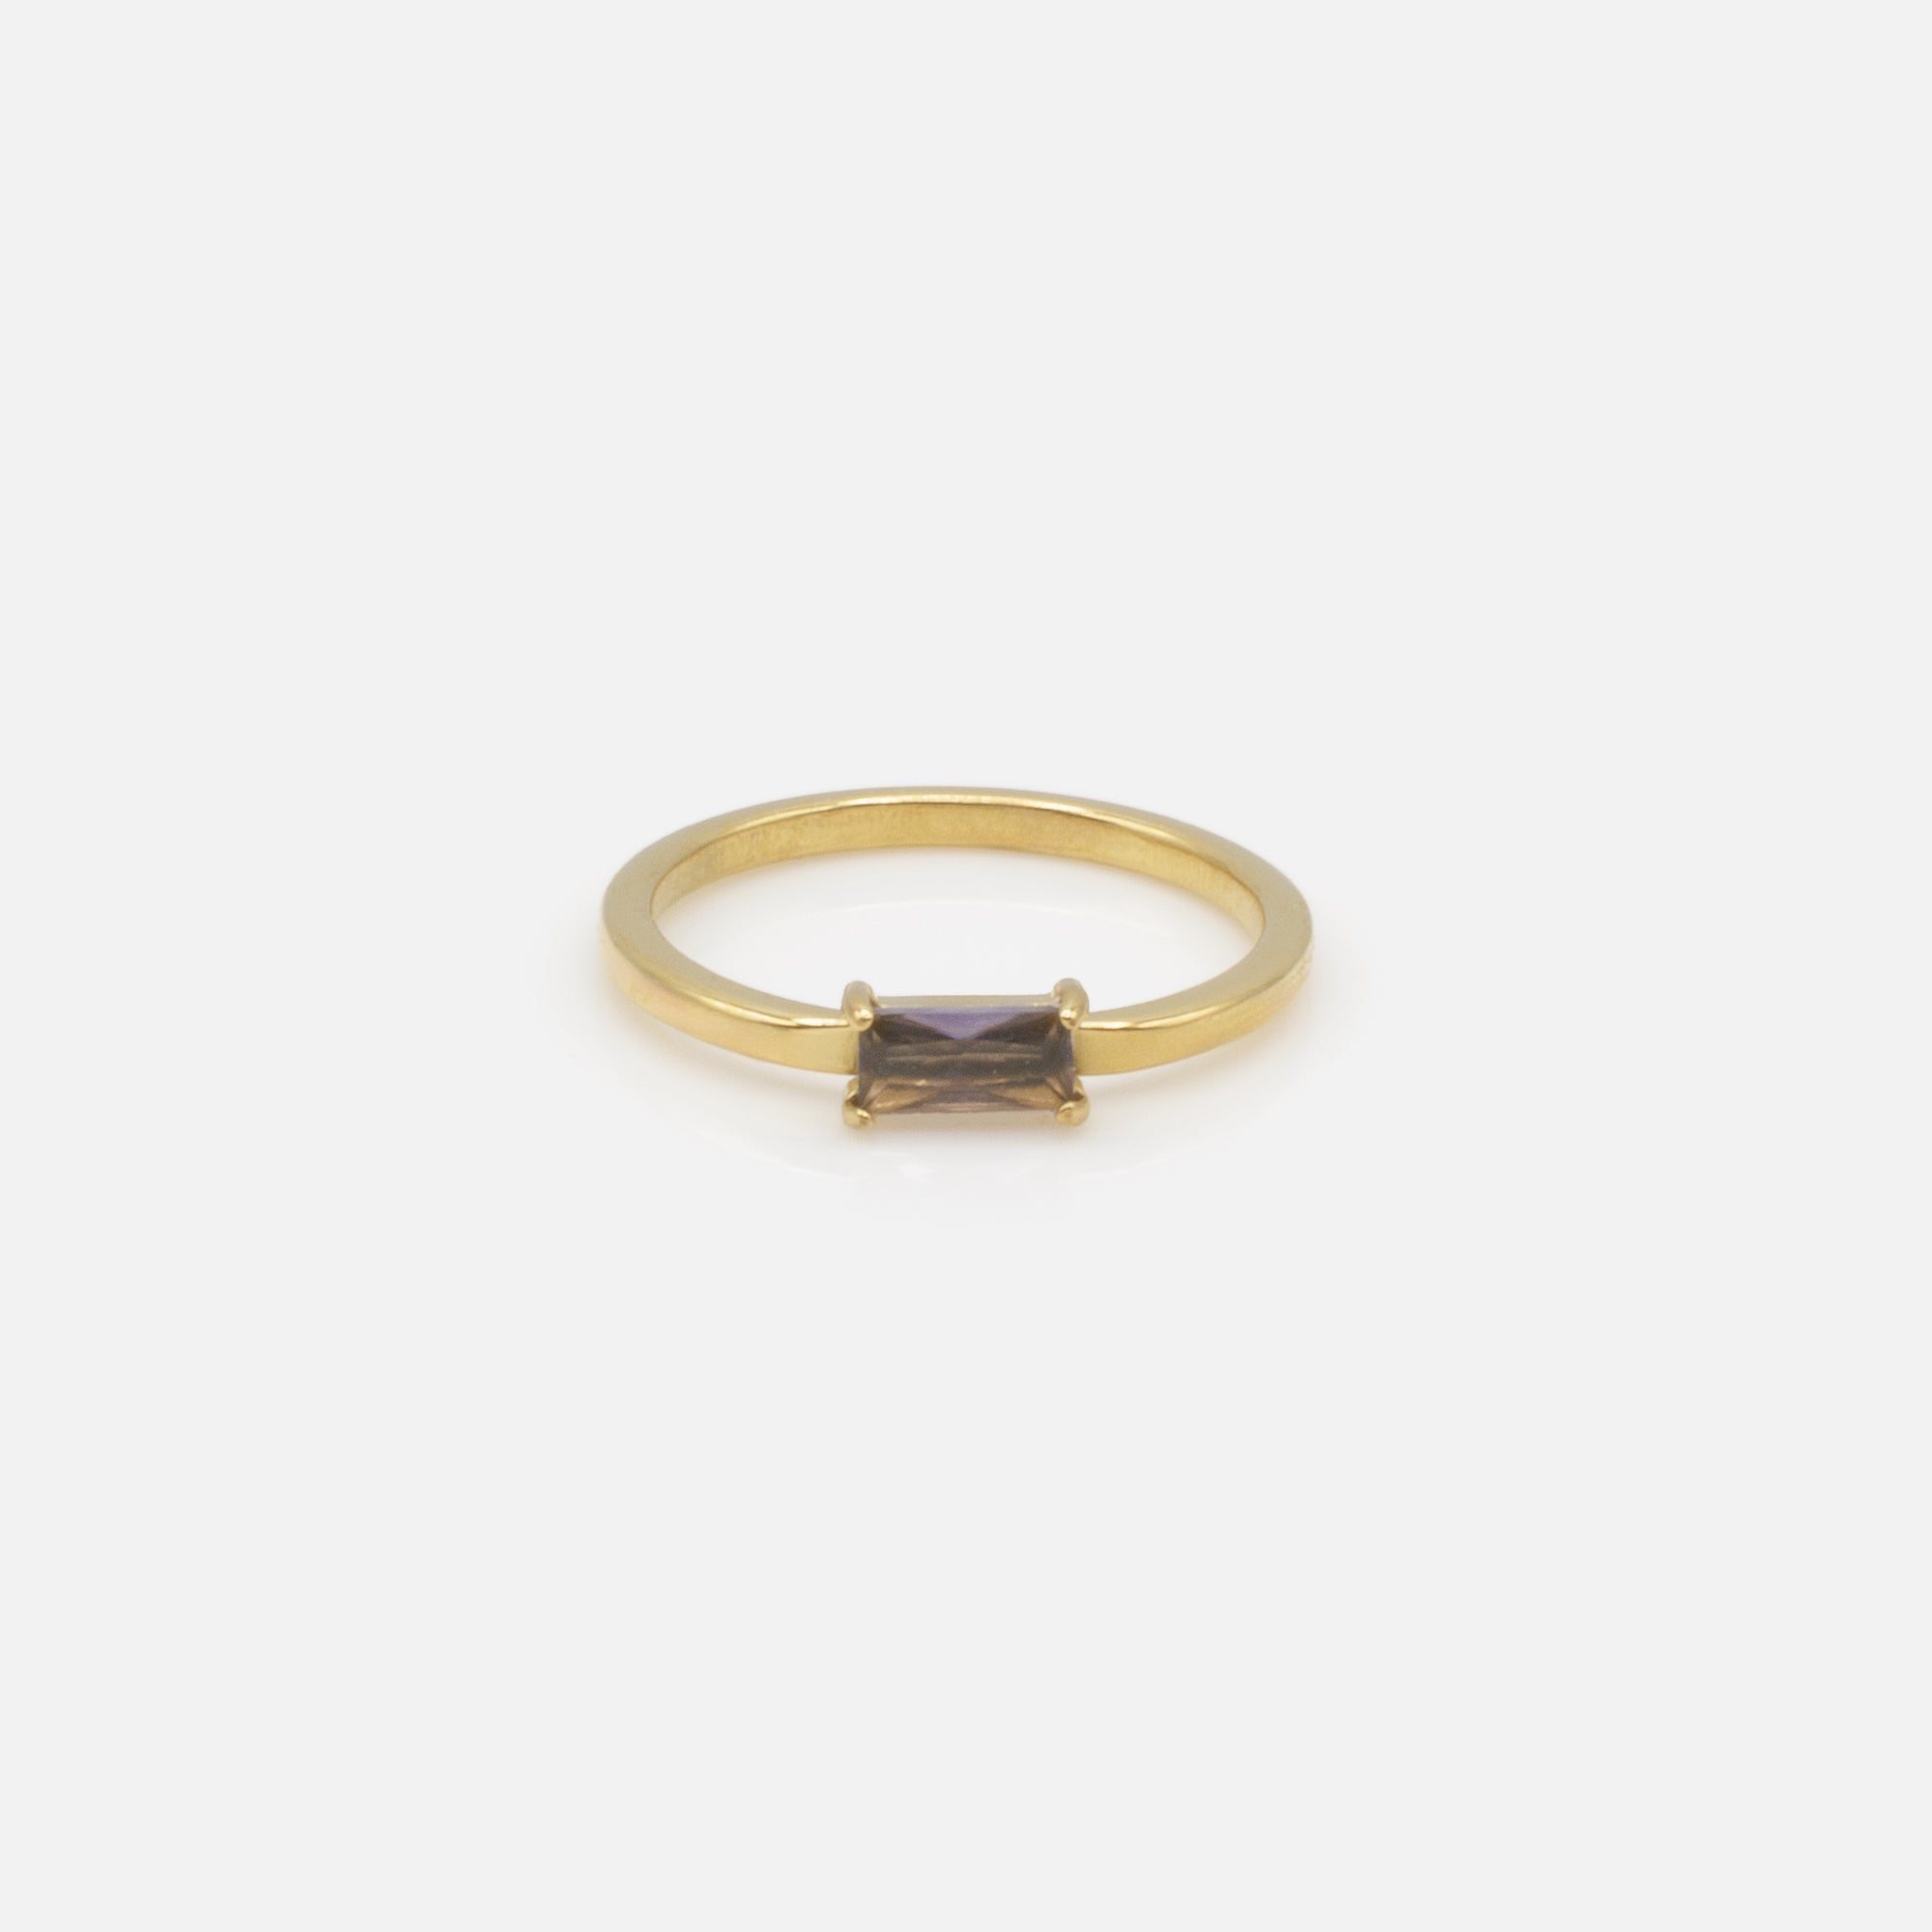 Gold ring with purple rectangular stone in stainless steel